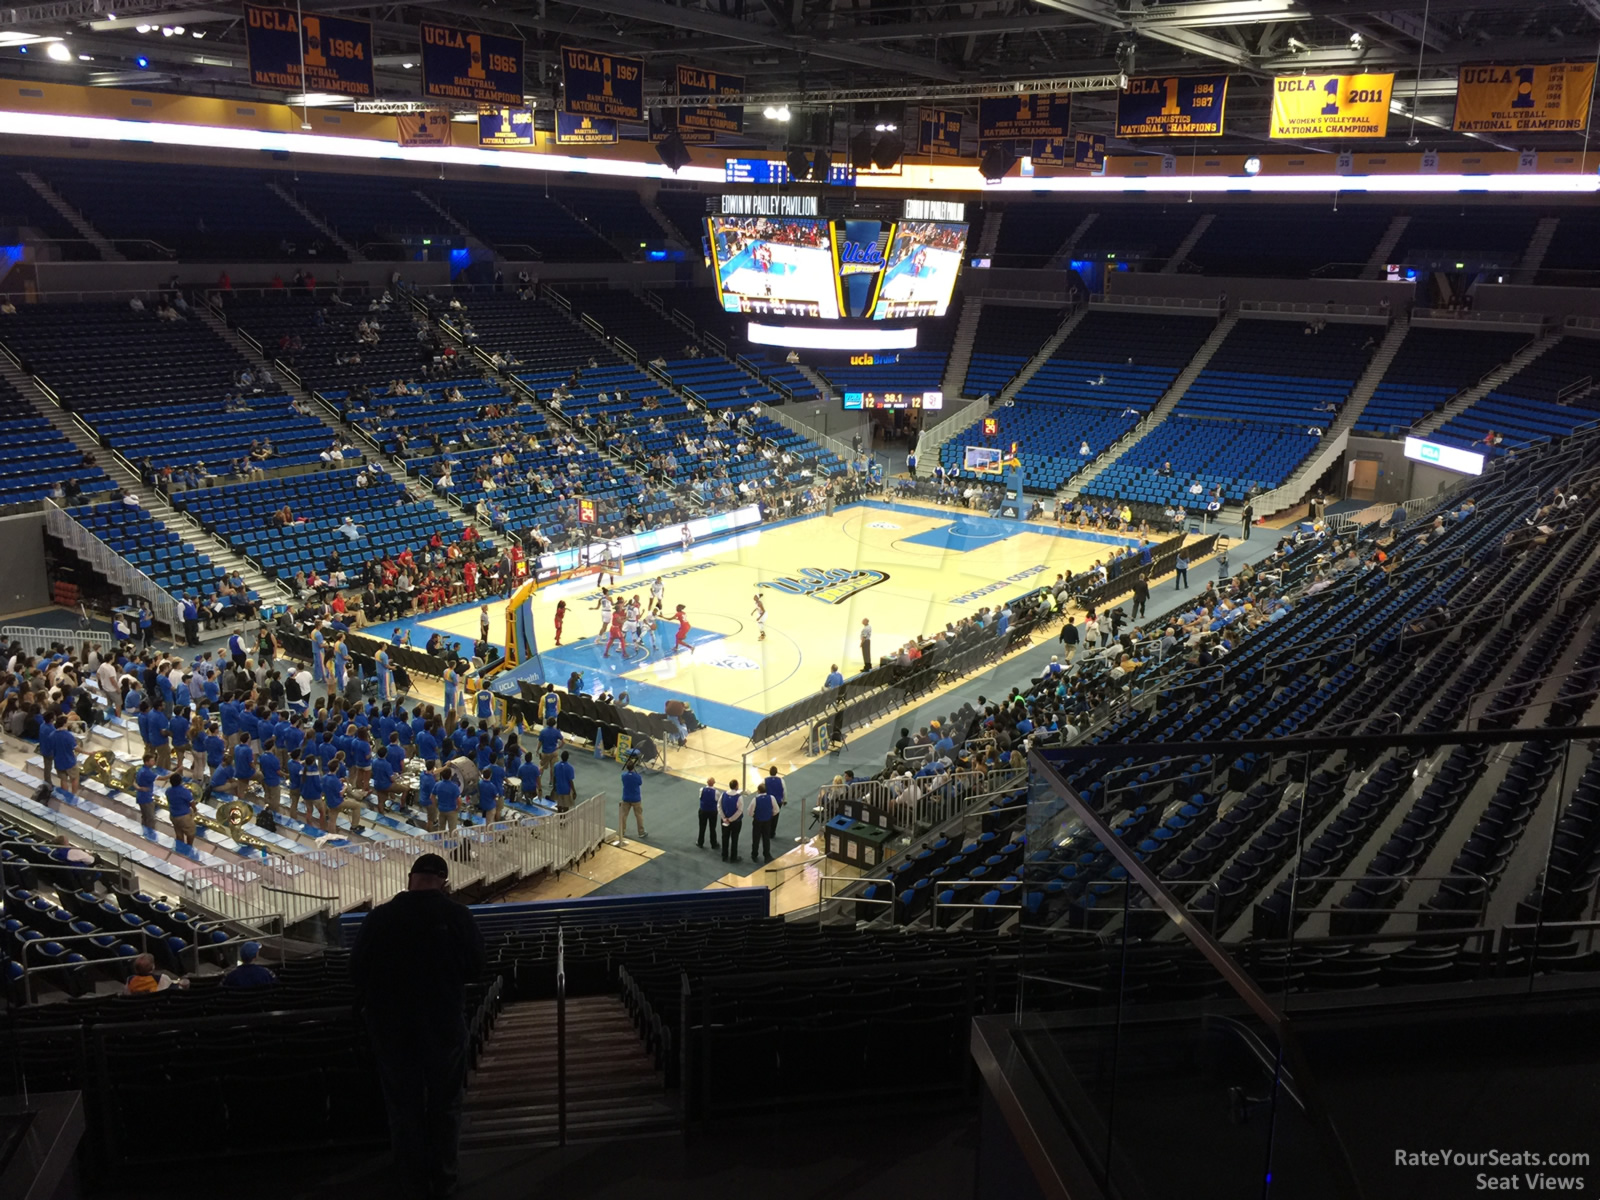 section 219b, row 6 seat view  - pauley pavilion